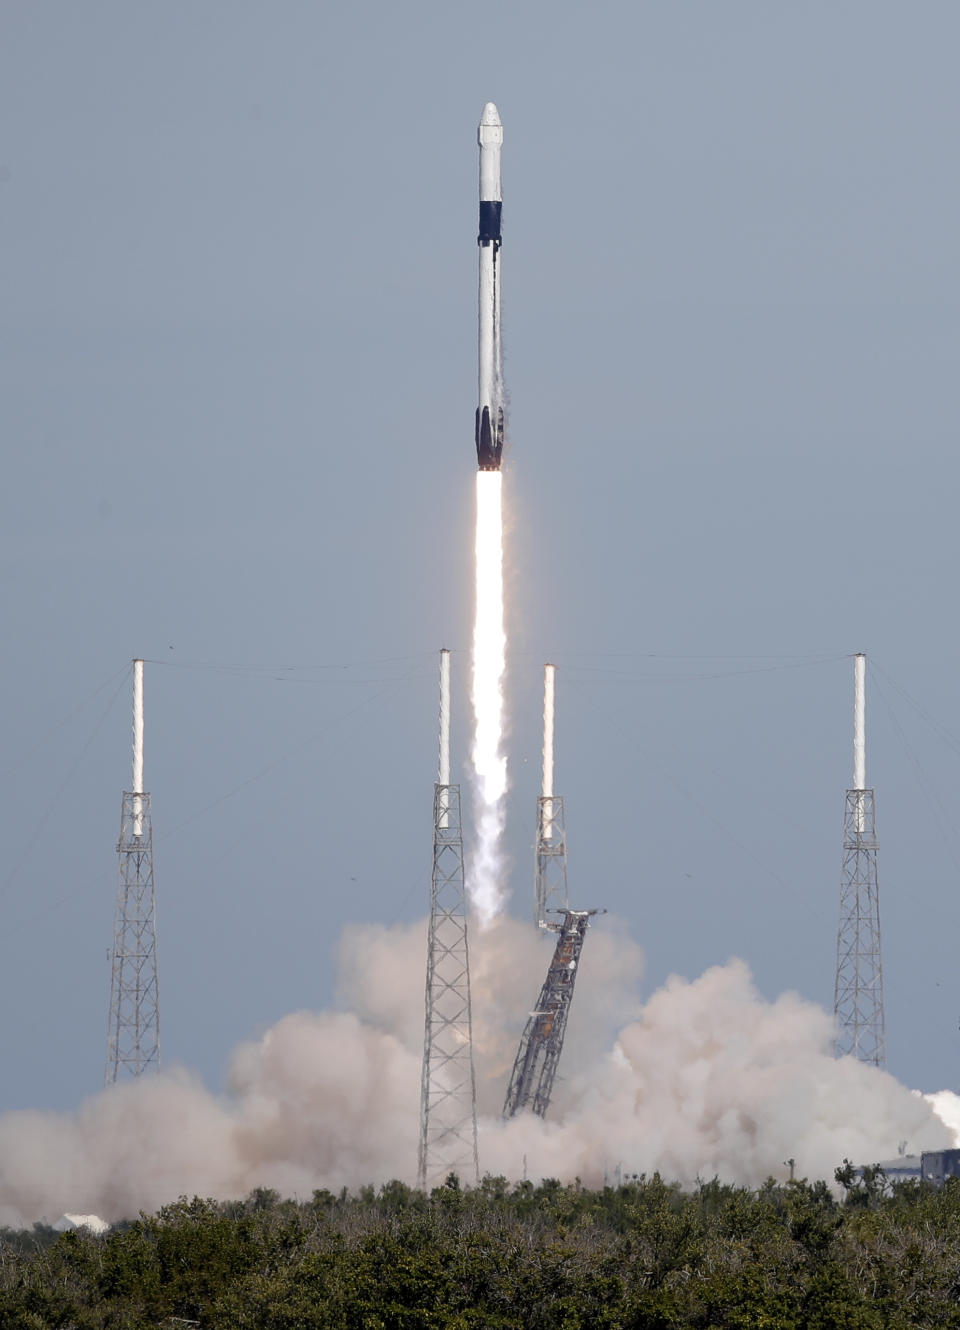 A Falcon 9 SpaceX rocket lifts off from space launch complex 40 at the Cape Canaveral Air Force Station in Cape Canaveral, Fla., Wednesday, Dec. 5, 2018, for a cargo delivery flight to the International Space Station. (AP Photo/John Raoux)